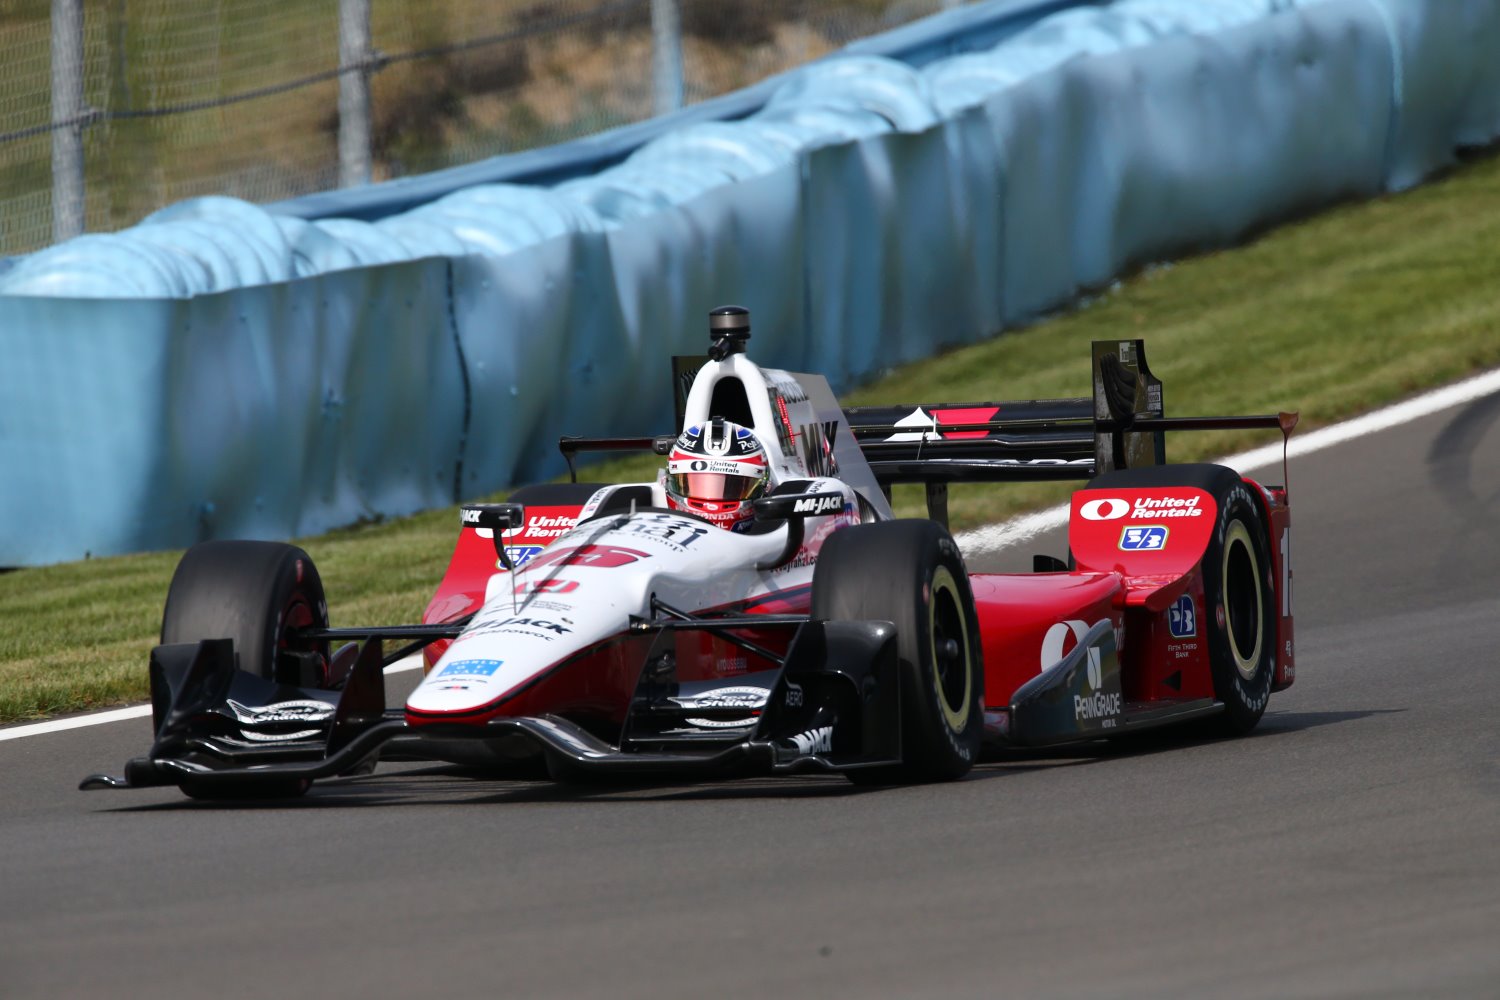 Rahal was fastest Friday morning, and Dixon fastest in the afternoon